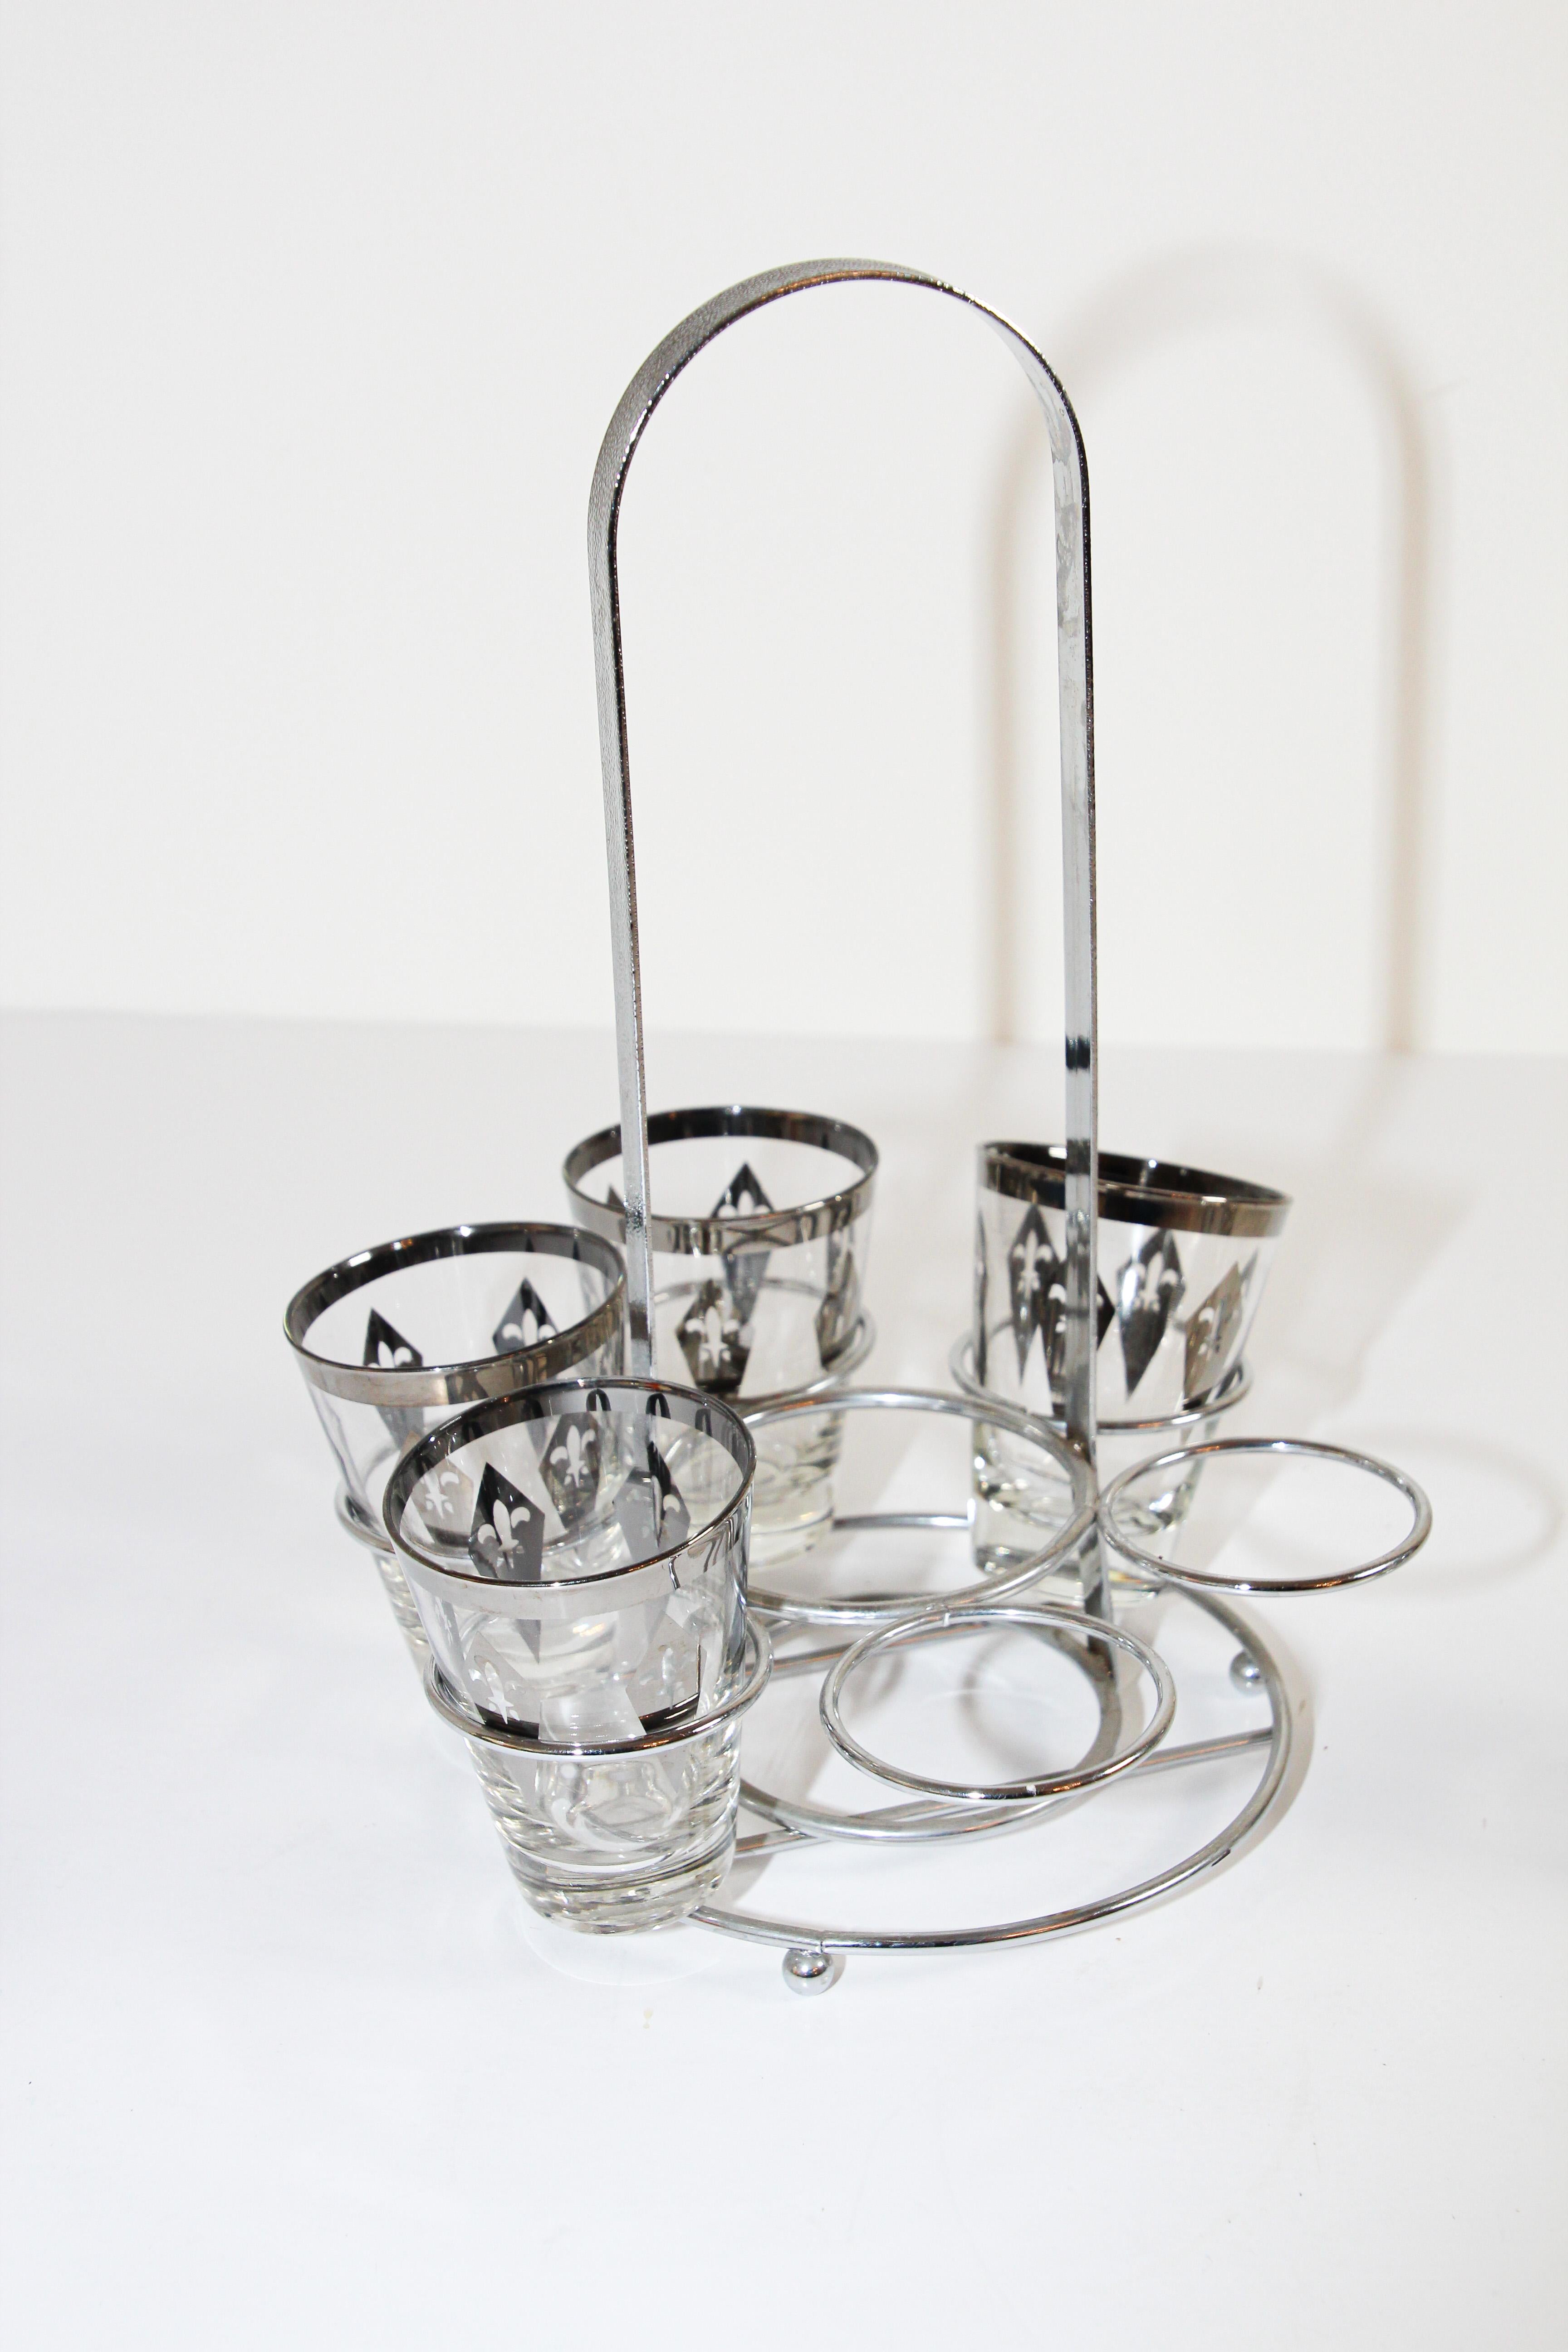 Vintage Barware Set of Six Glasses with Silver Overlay in Carrier Caddy 12